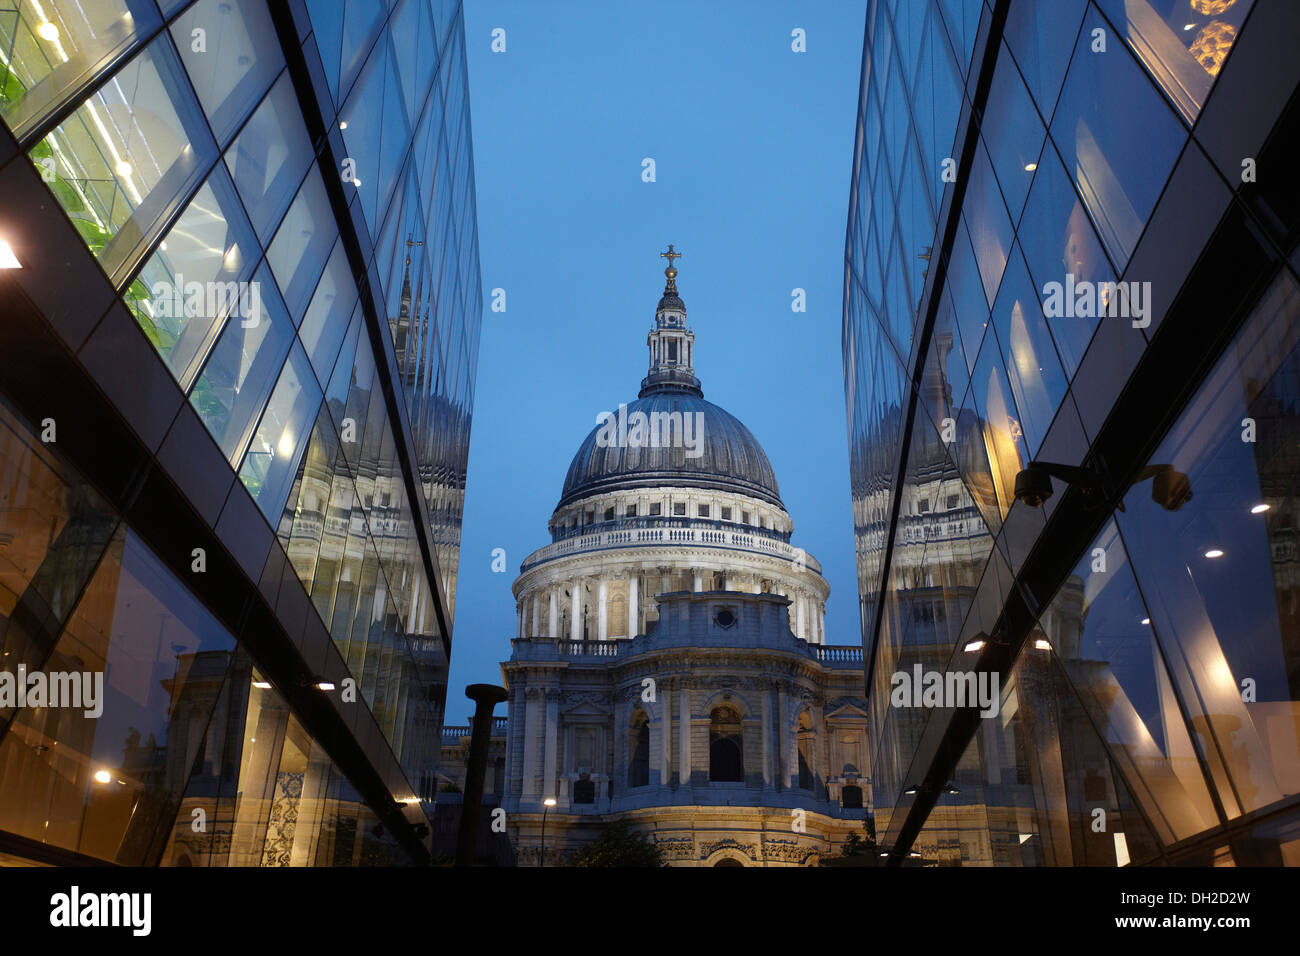 St. Paul's Cathedral and a shopping mall, One New Change shopping centre, London, England, United Kingdom, Europe Stock Photo